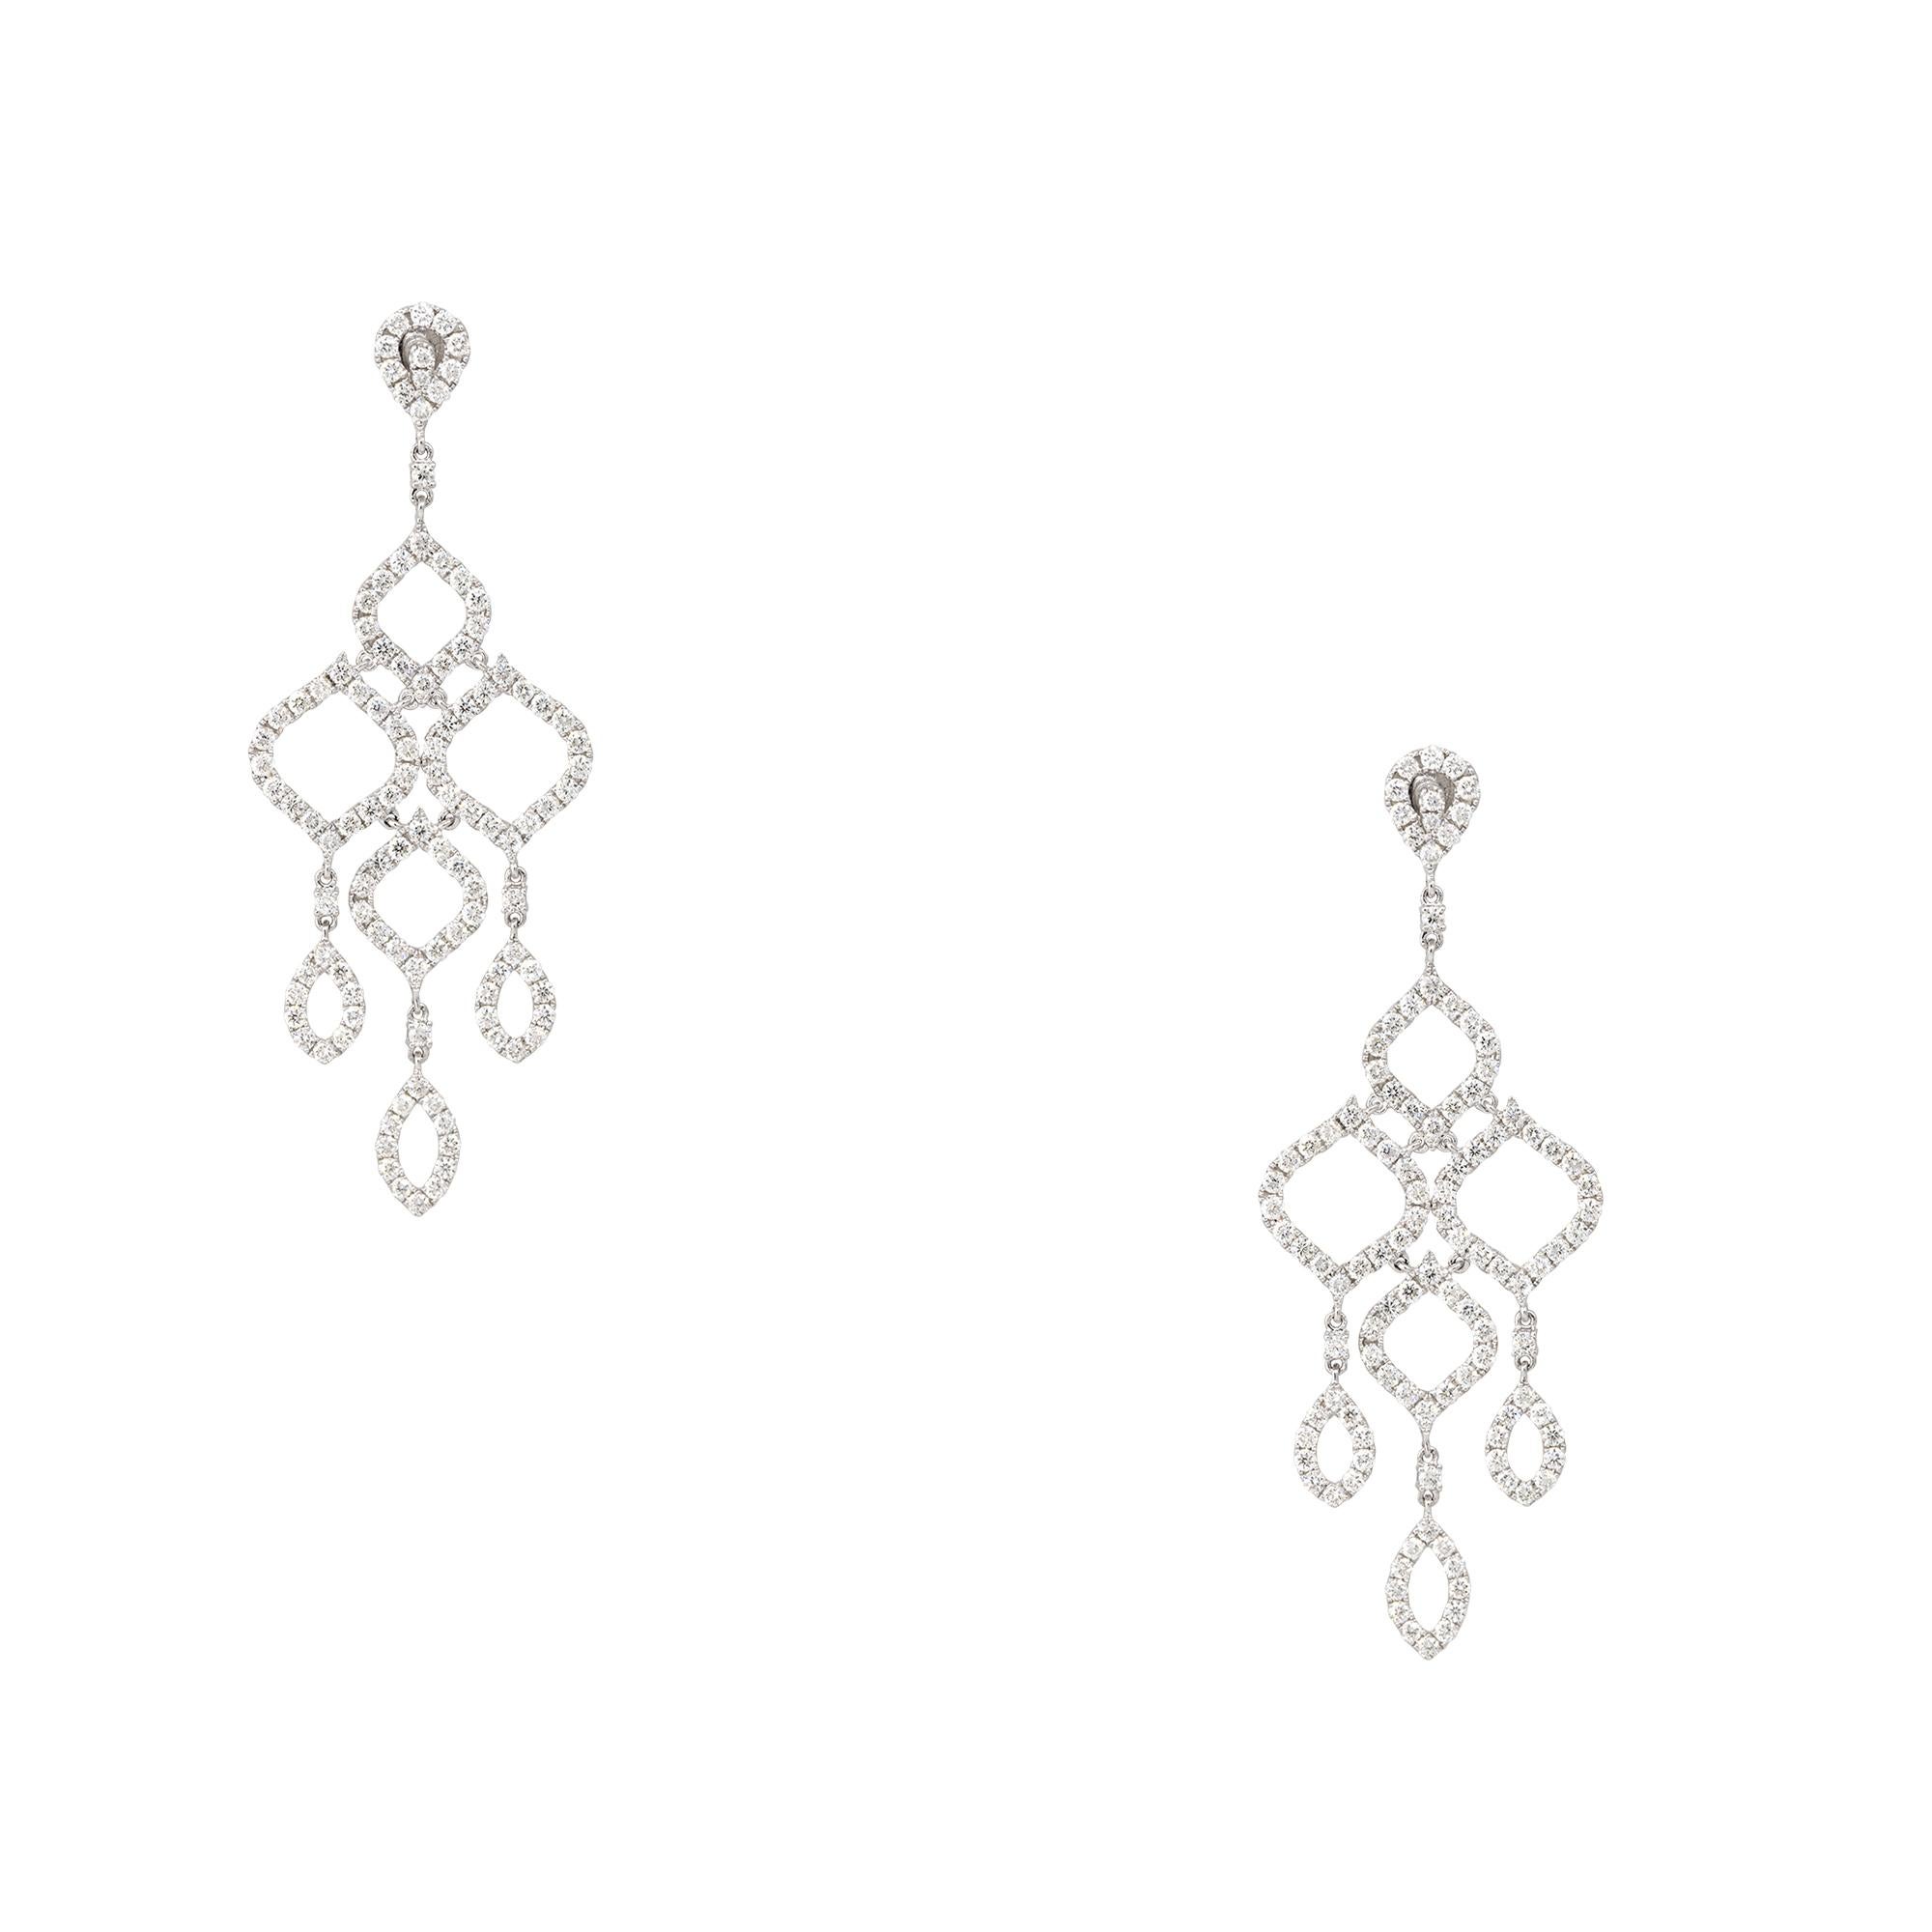 18k White Gold 6.69ctw Round Brilliant Diamond Open Chandelier Drop Earrings
Material: 18k White Gold
Diamond Details: The diamonds are approximately 6.69 carats of round brilliant cut diamonds. All diamonds are approximately F/G in color and